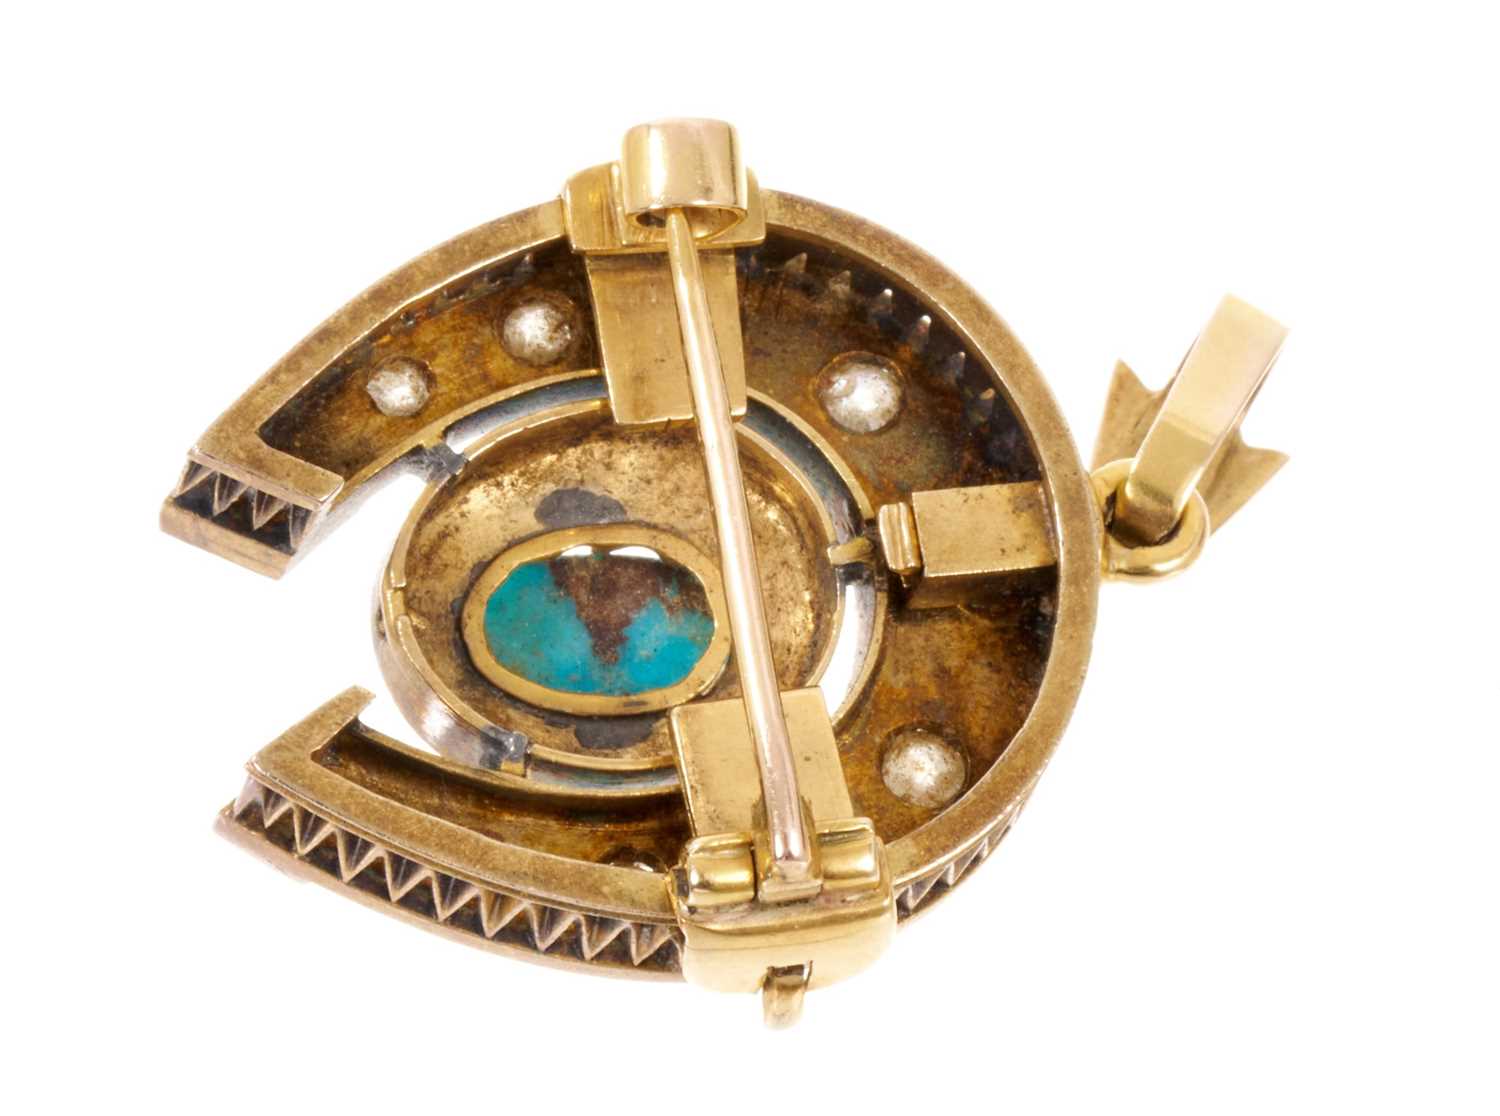 Late 19th century diamond and turquoise pendant brooch with detachable fittings - Image 2 of 3